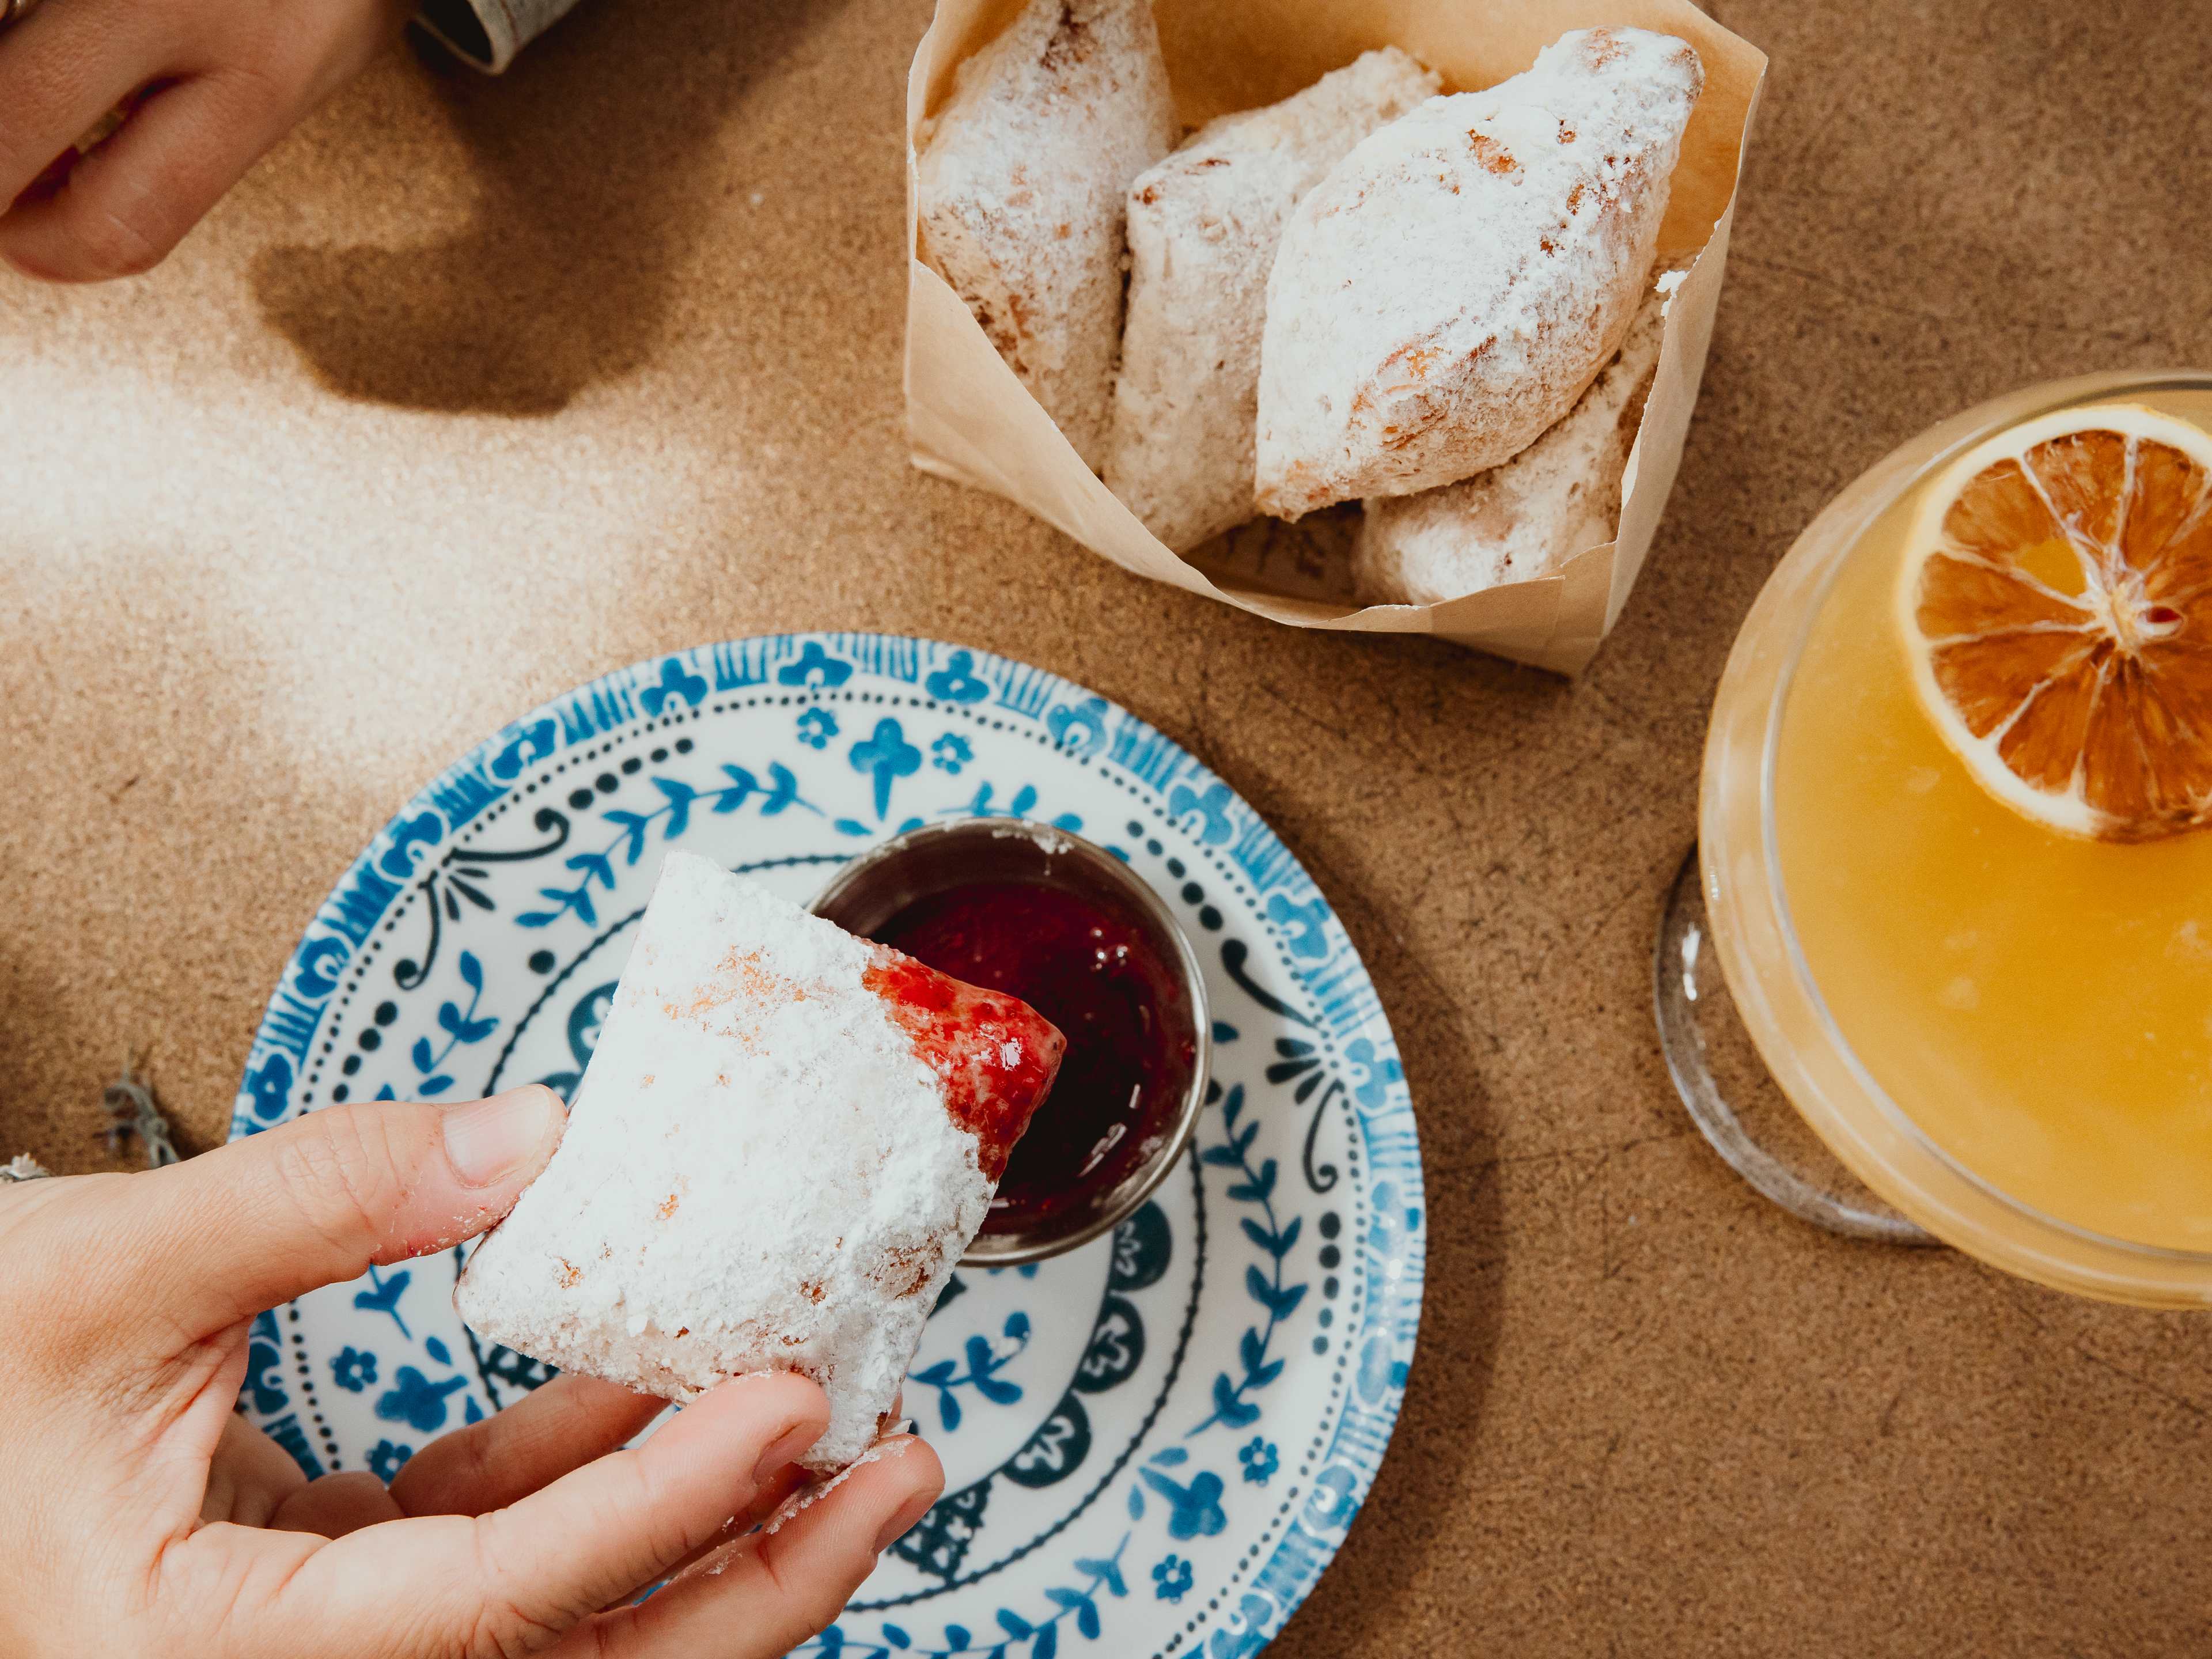 bag of beignets next to cocktail, beignet being dipped into raspberry sauce